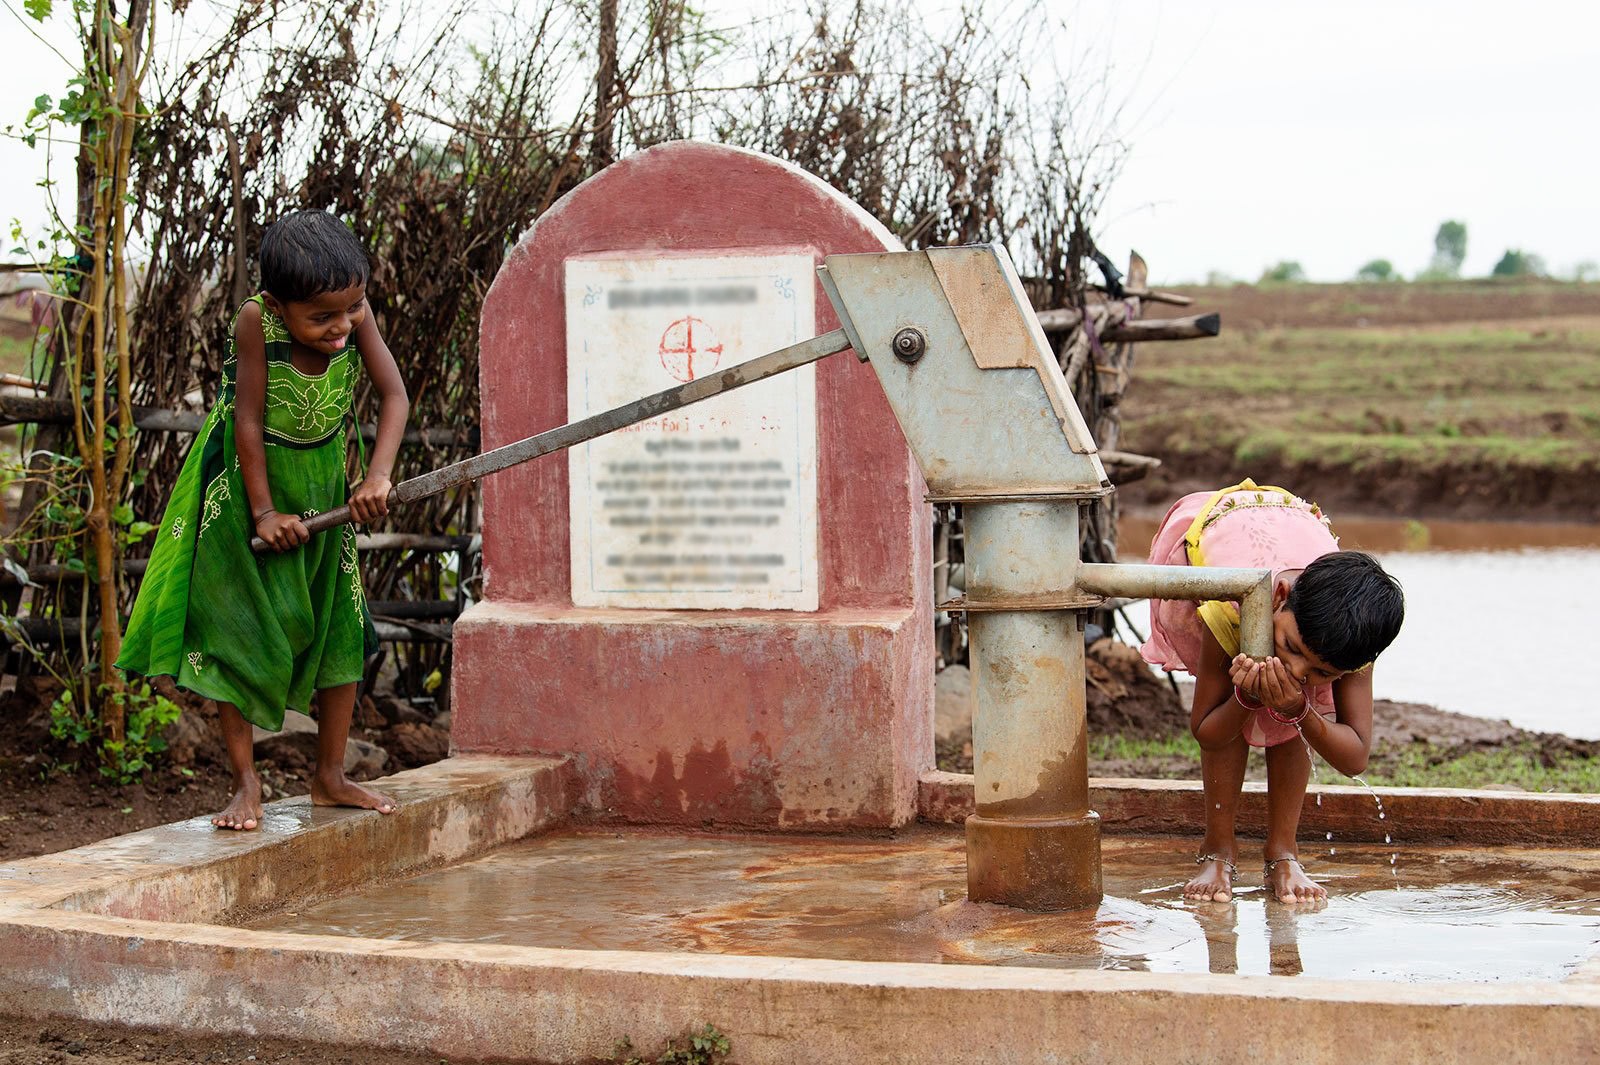 Texas-based mission Gospel for Asia water project provides clean drinking water to nearly 40 million desperate people across Asia